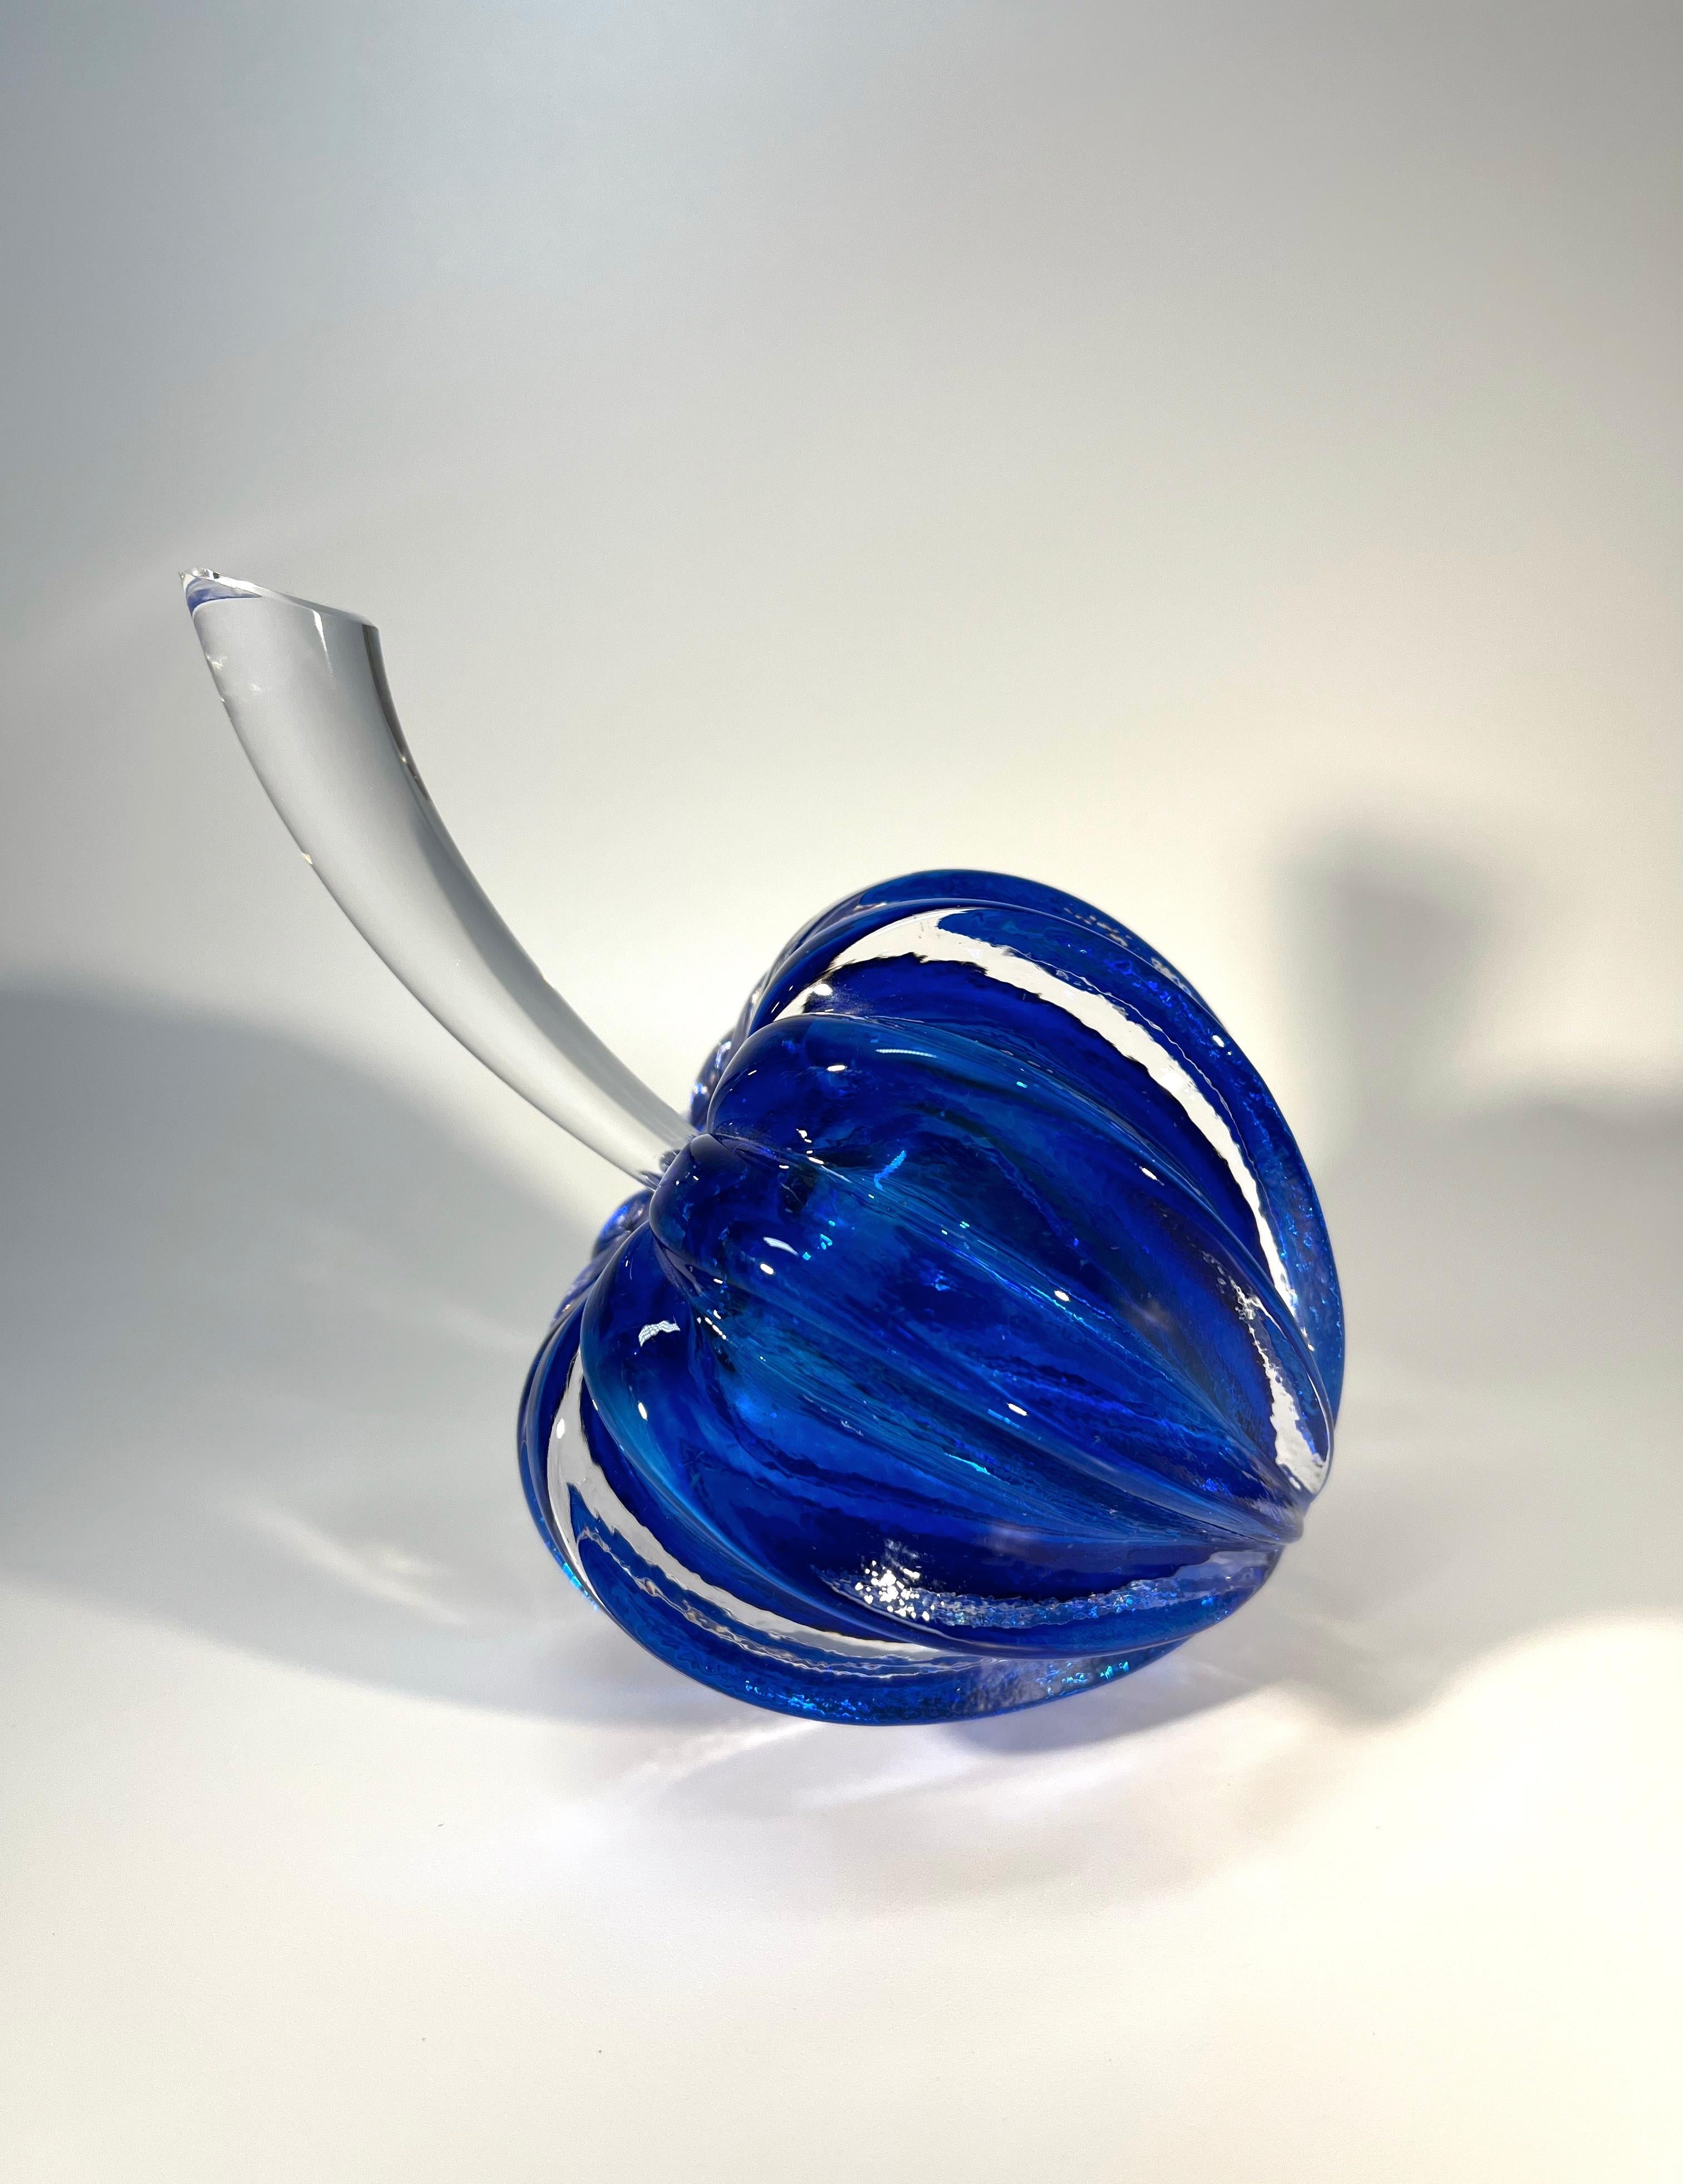 Bold 'Stemmed Fruit' perfume bottle of cobalt blue crystal with a clear crystal stopper
A splendid piece of contemporary counter-balanced glass art
Created by Ian Hankey for Teign Valley Glass of Devon, England
Signed IH TVG to the base
Circa